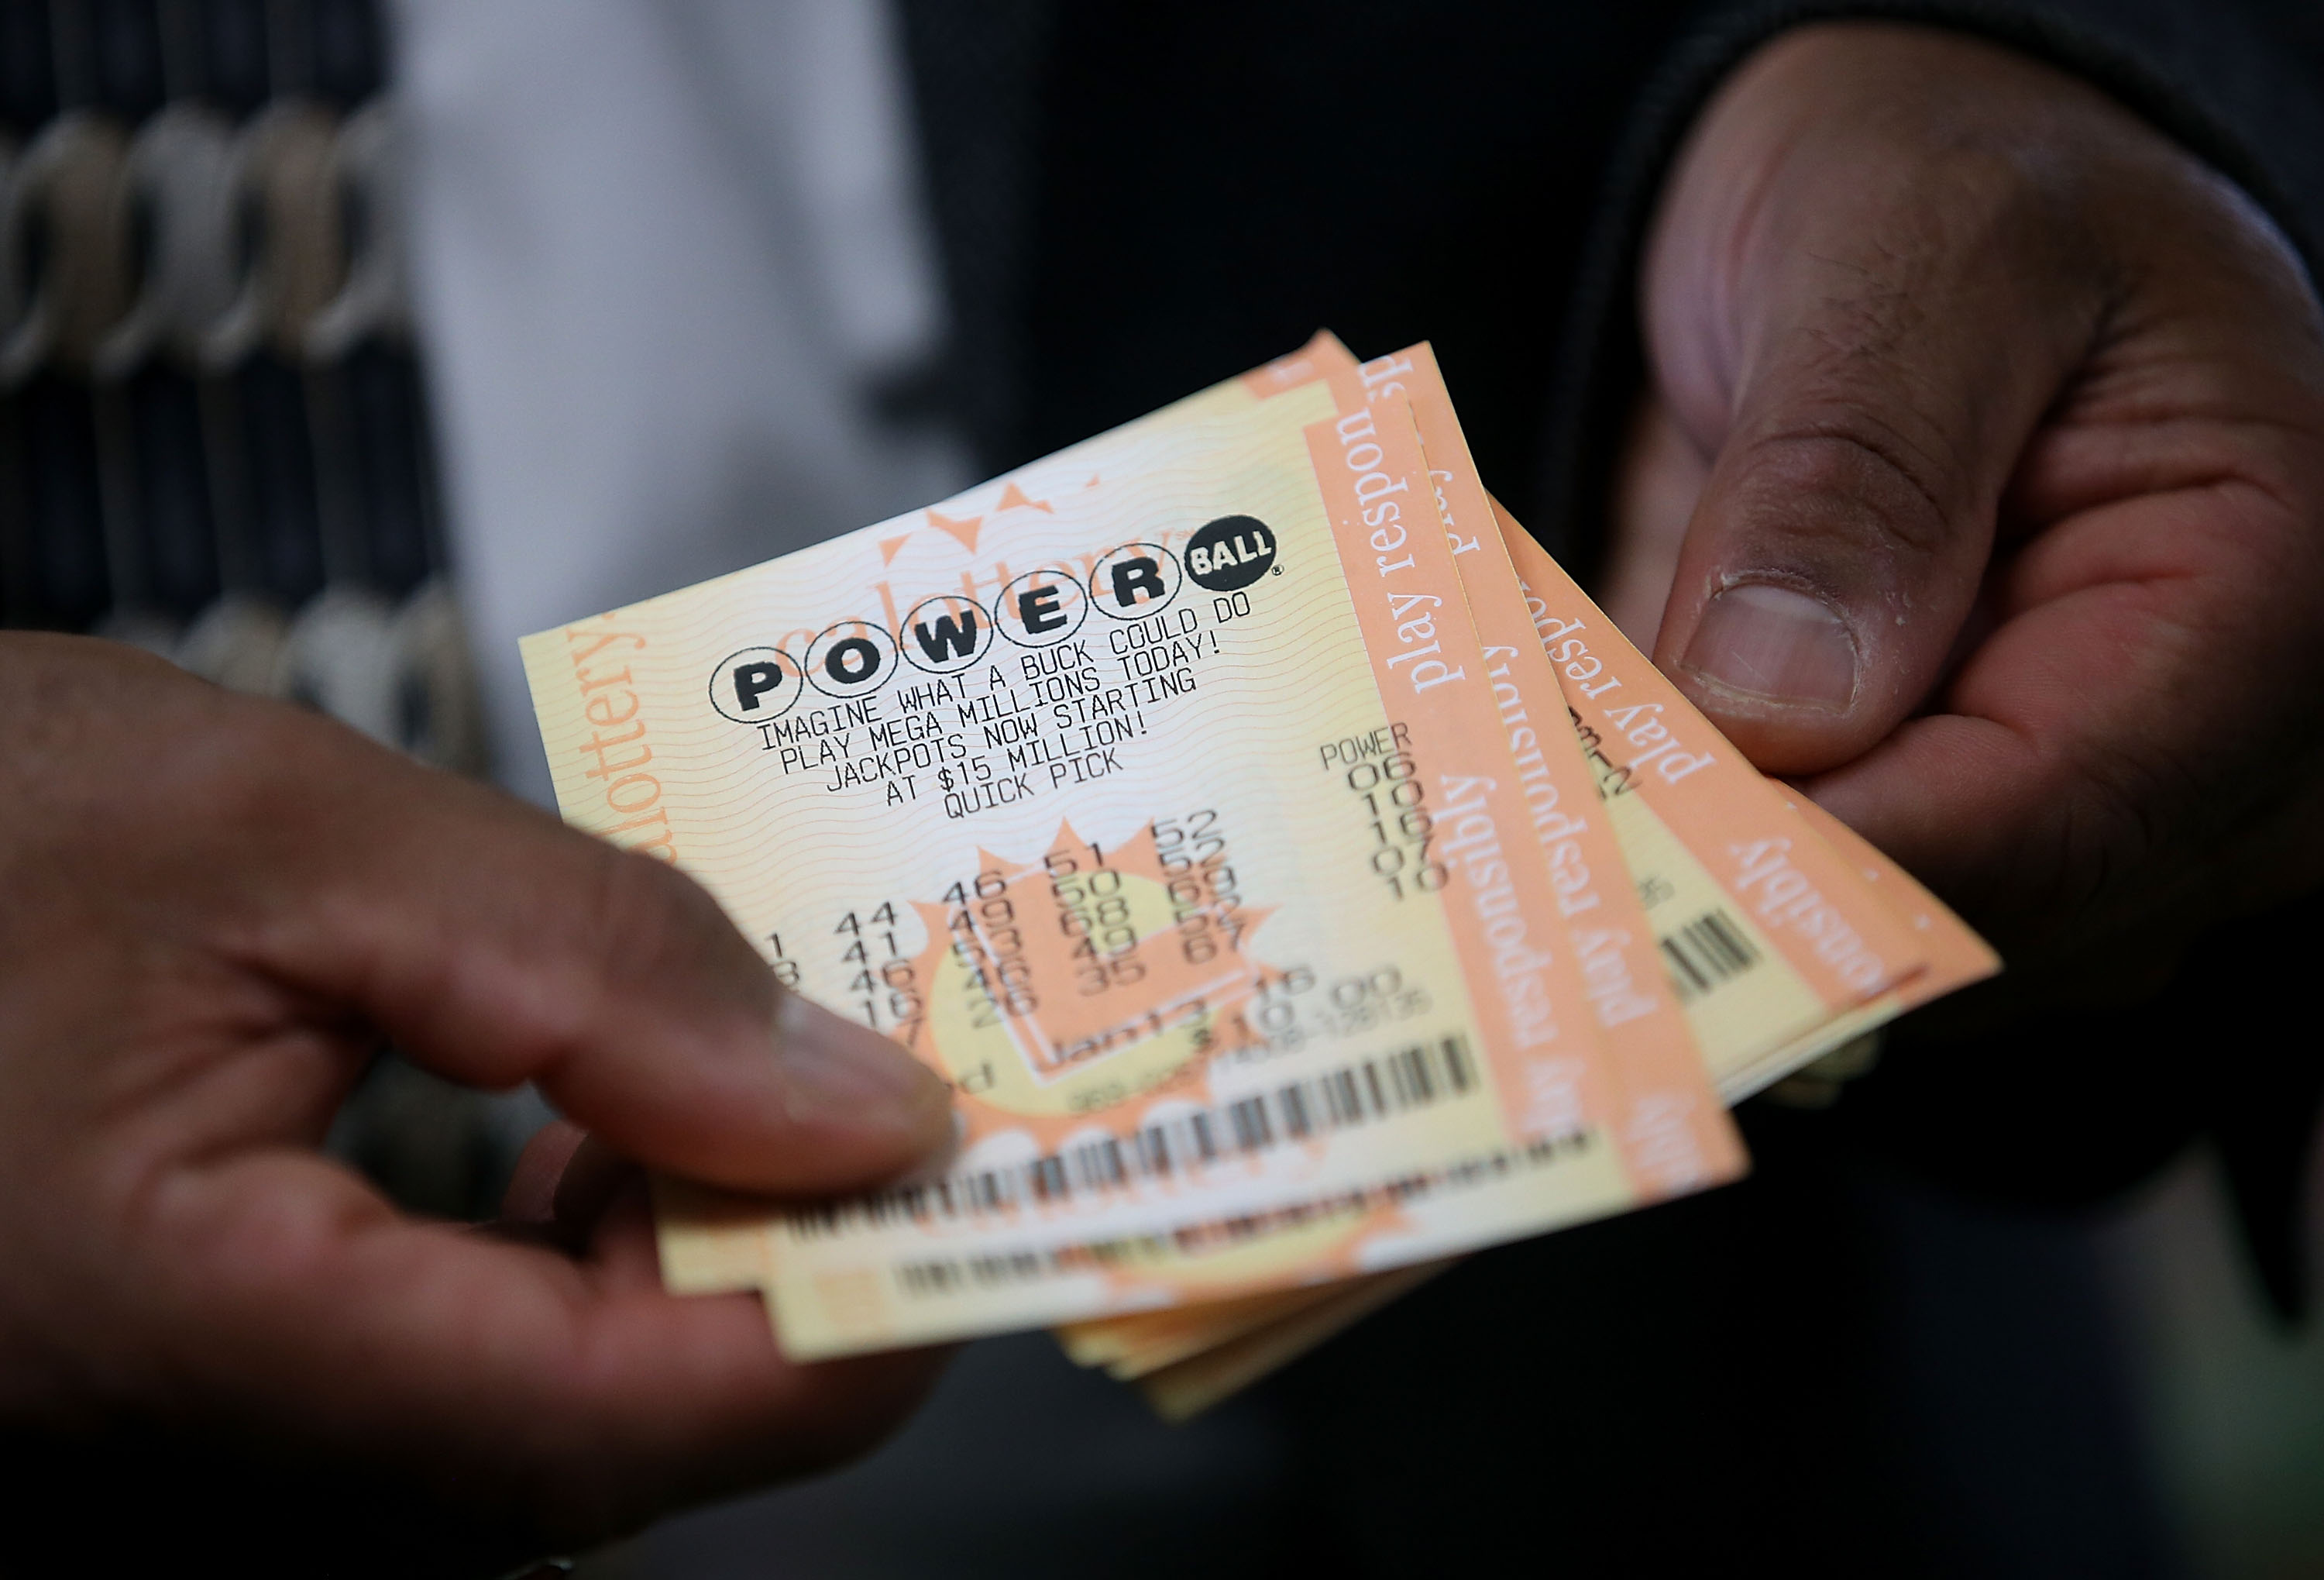 A customer holds Powerball tickets that he purchased at Kavanagh Liquors on Jan. 12, 2015 in San Lorenzo, Calif. (Justin Sullivan—Getty Images)